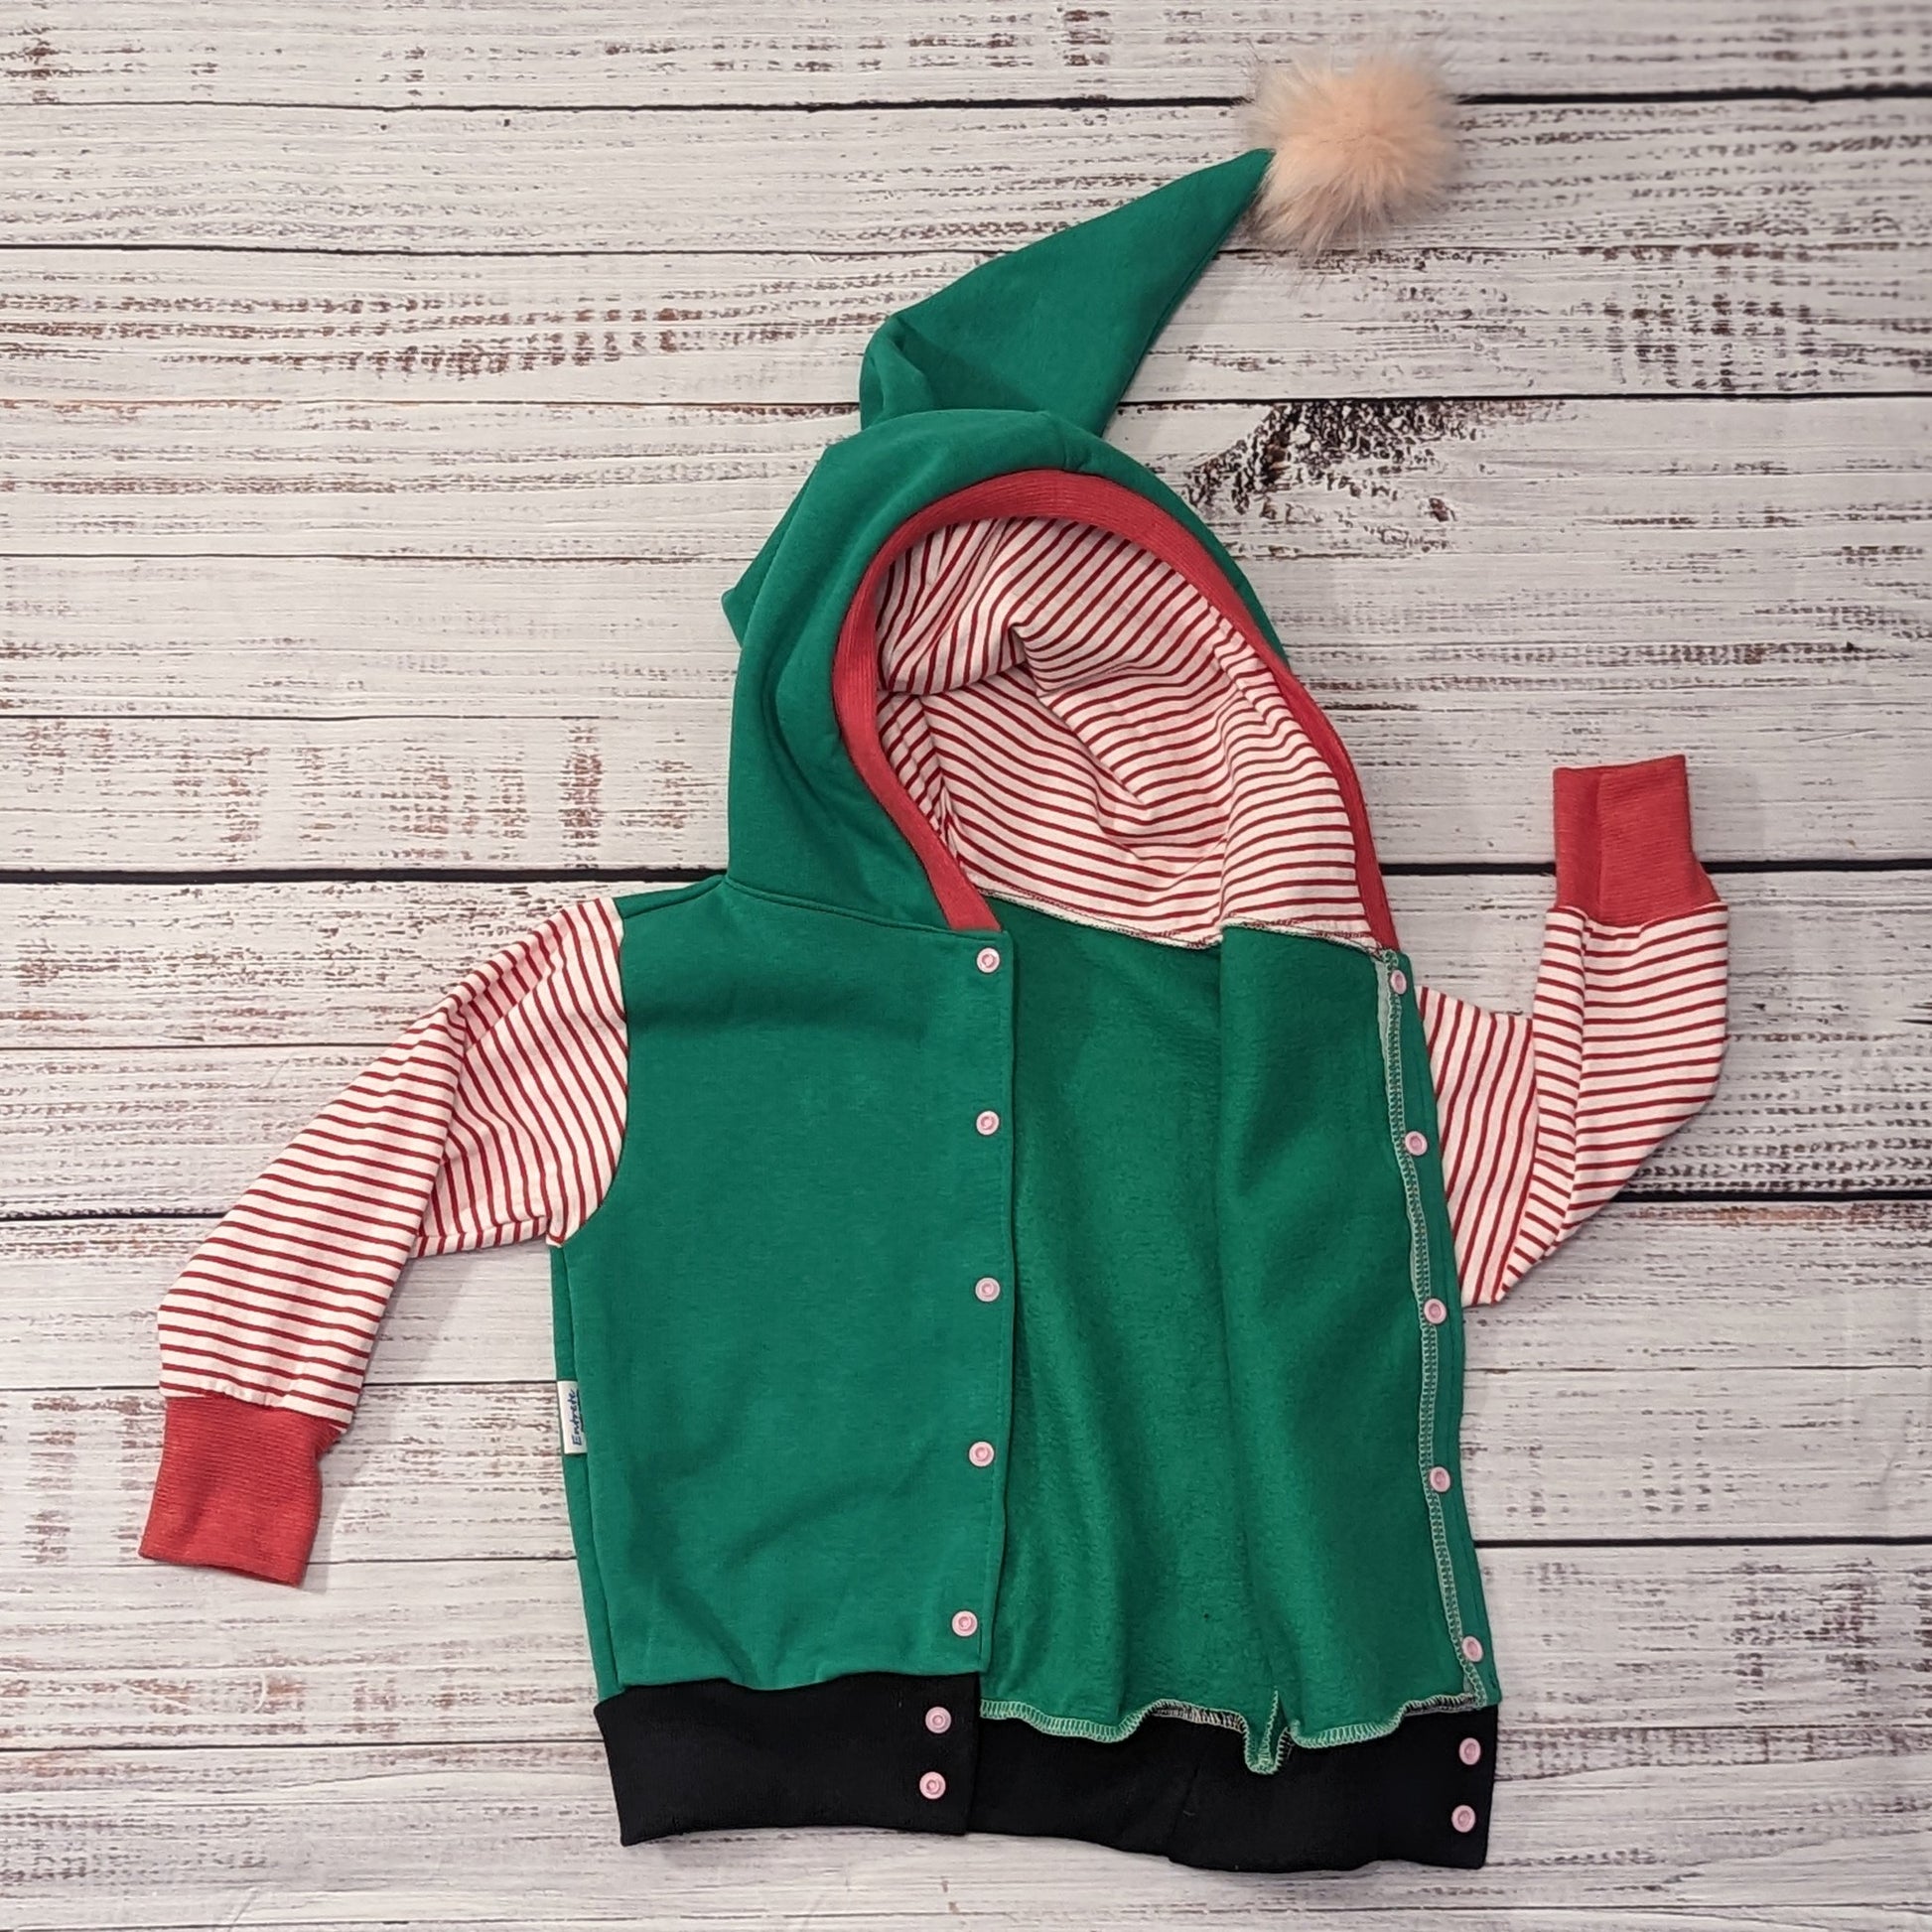 Fantastically fun reversible elf hoodie. Handmade in green cotton sweatshirt fleece, with red striped cotton jersey arms, graphite ribbing waist and red ribbing cuffs . With adorable pom-pom hood. Shown with popper entry open.